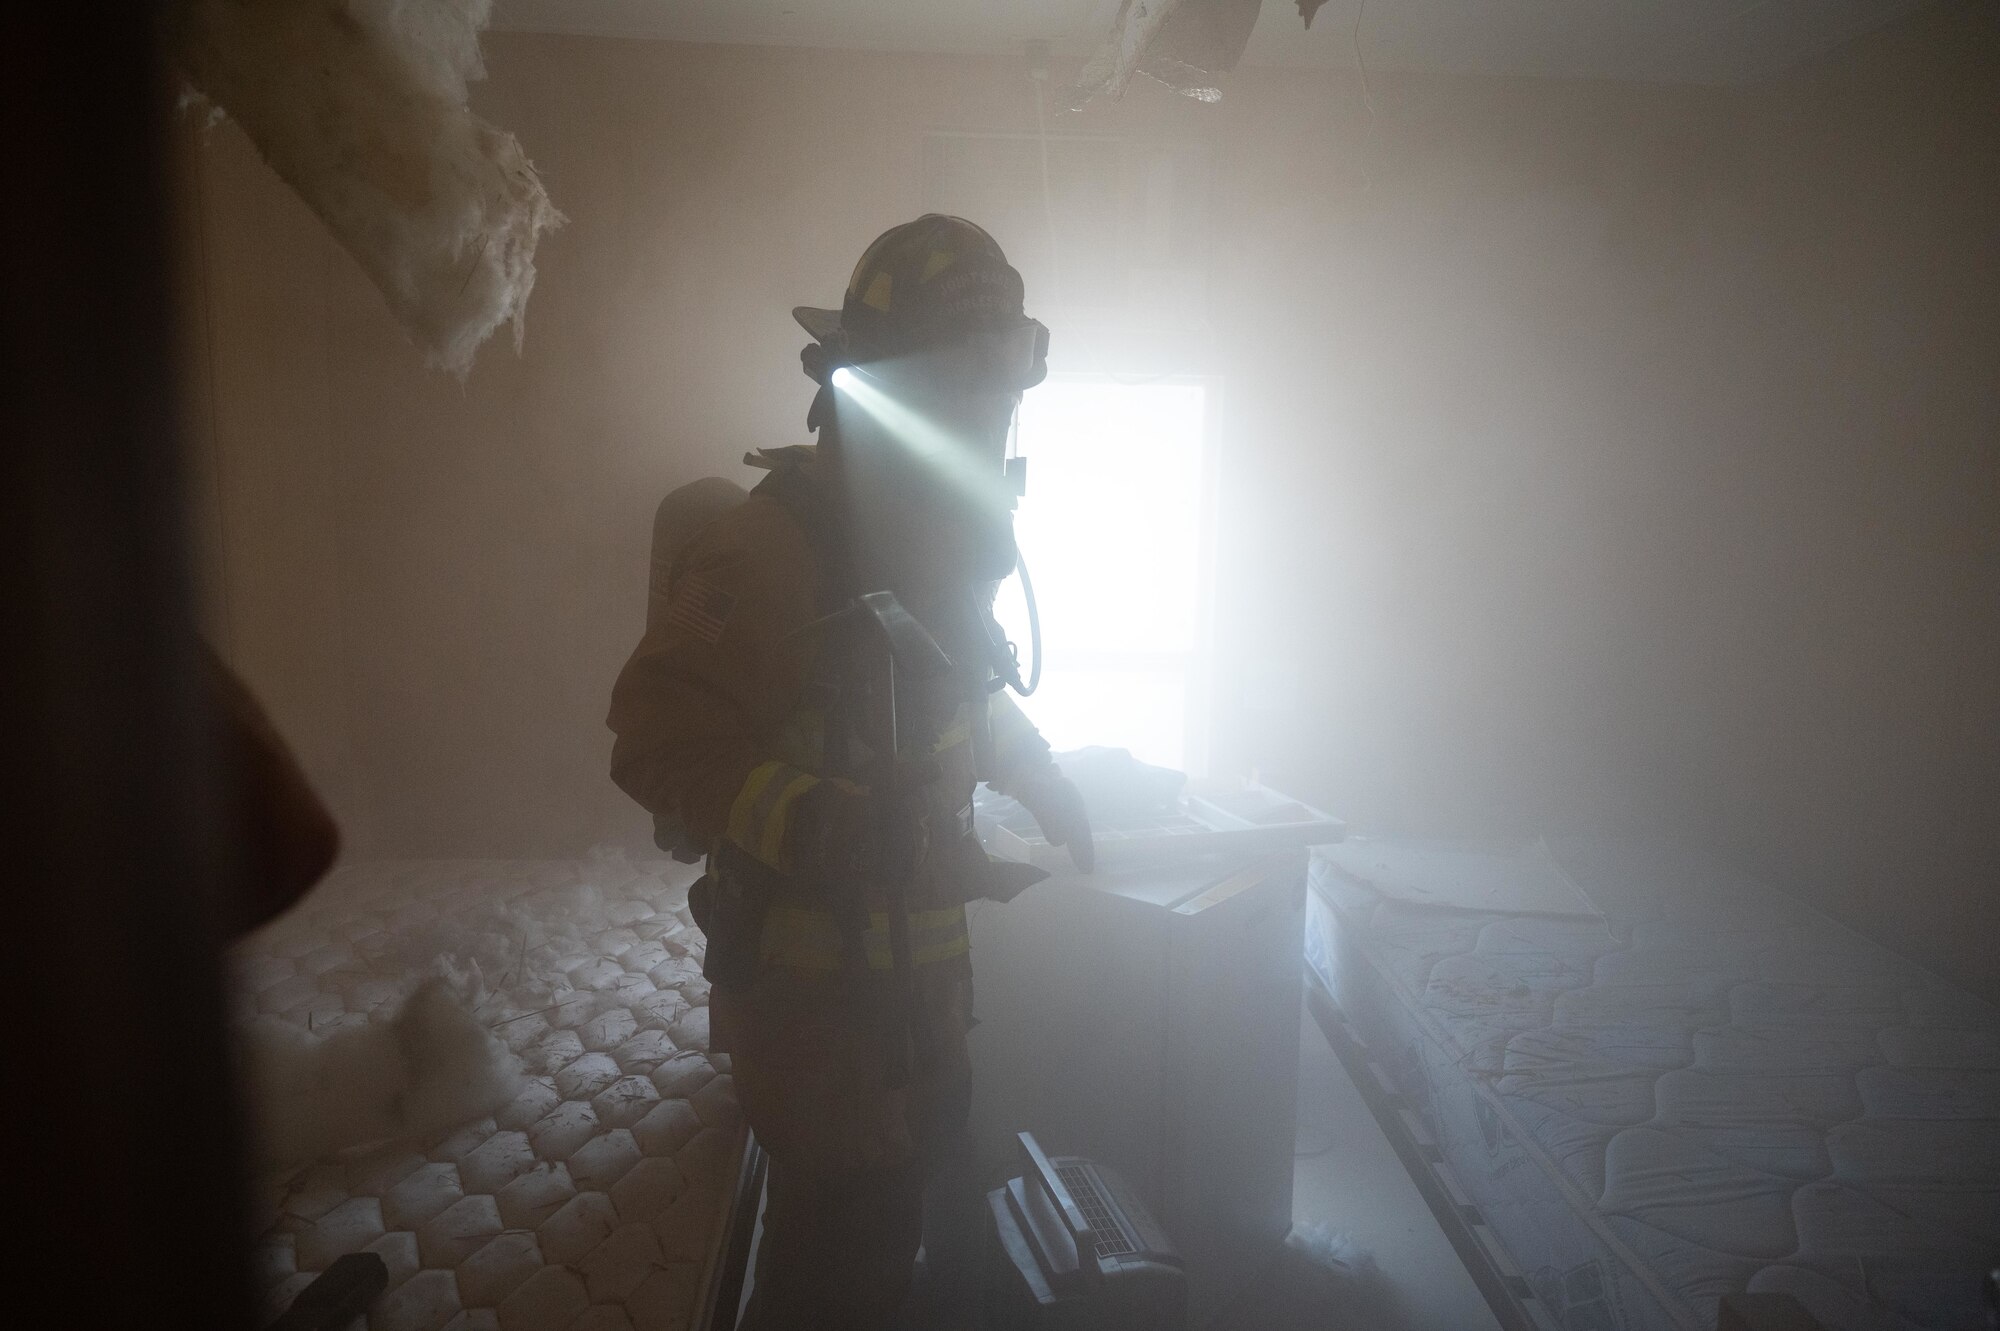 U.S. Air Force Senior Airman William Webber, a firefighter and acting crew chief assigned to the 379th Expeditionary Civil Engineer Squadron searches a room during an exercise Aug. 30, 2022 at Al Udeid Air Base, Qatar. The firefighters performed a systematic search pattern looking for victims and potential fire spread while also performing a venting operation to remove smoke and harmful gases from the building. (U.S. Air Force photo by Staff Sgt. Dana Tourtellotte)